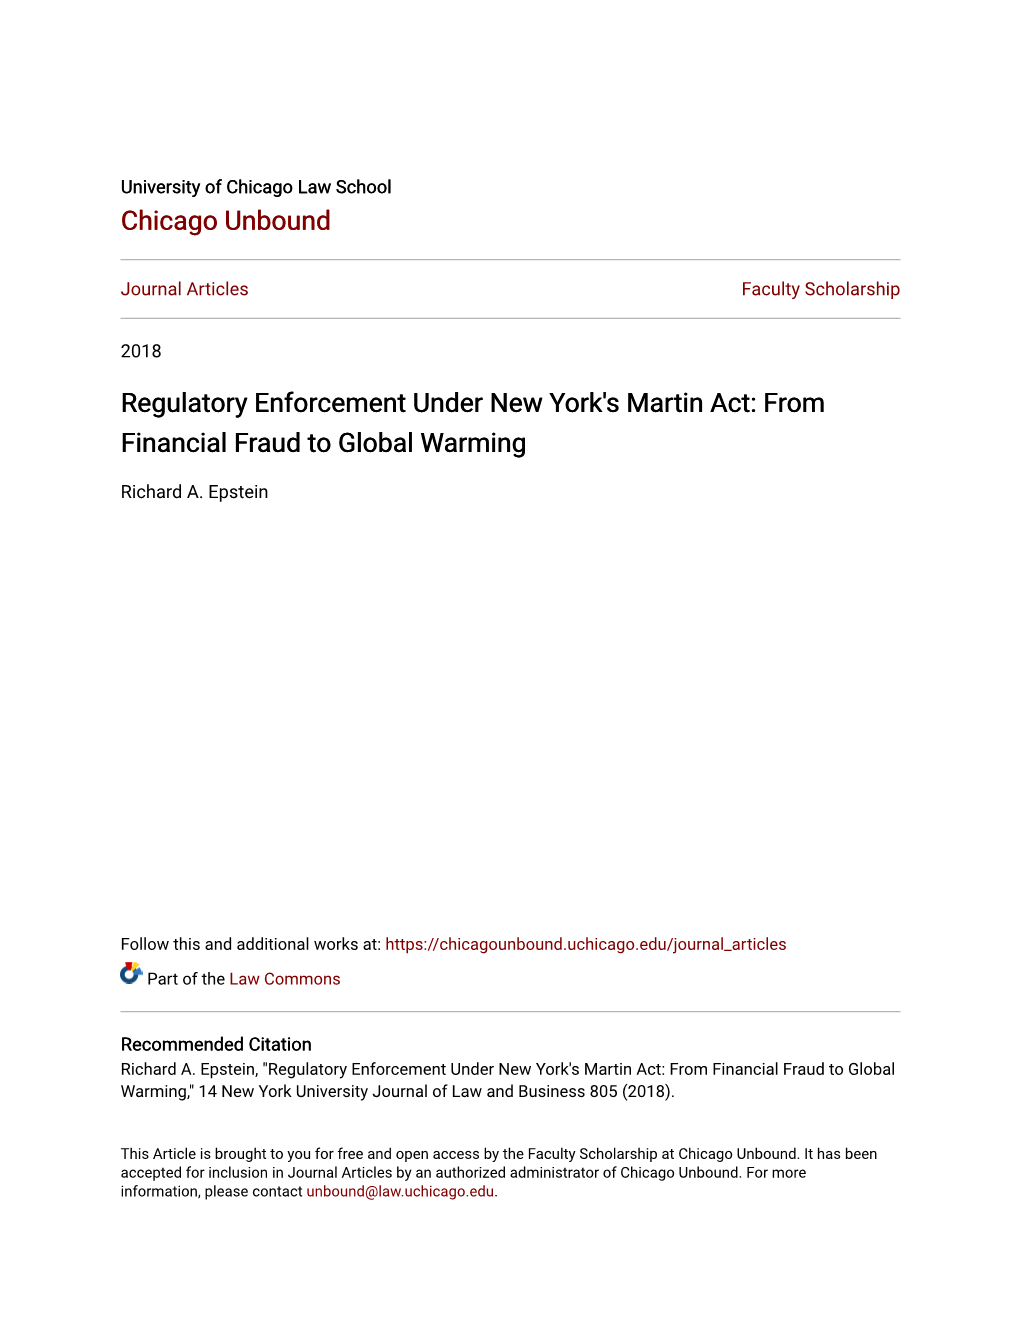 Regulatory Enforcement Under New York's Martin Act: from Financial Fraud to Global Warming